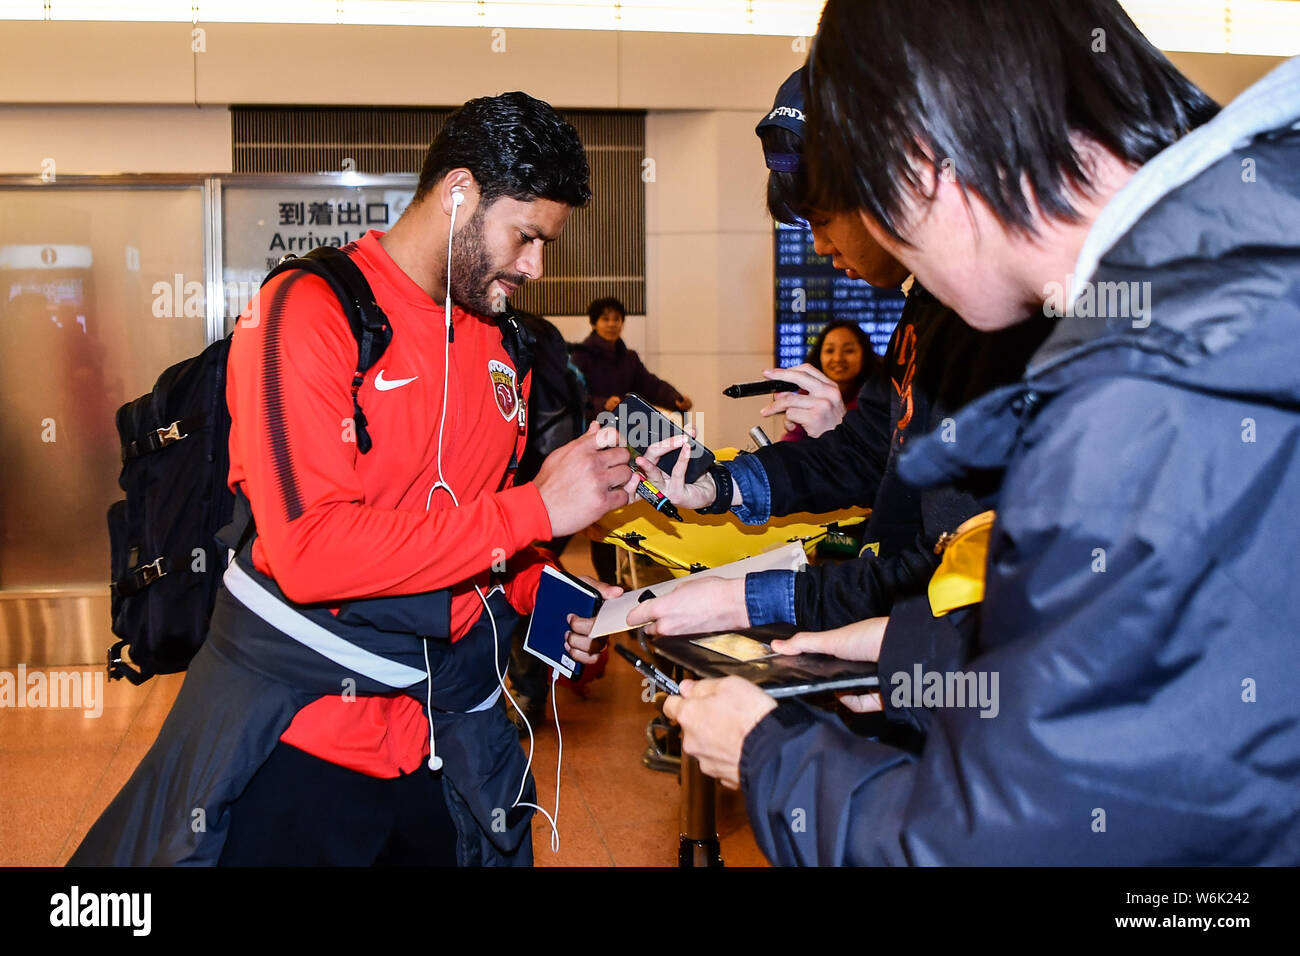 Brazilian soccer player Givanildo Vieira de Sousa, better known as Hulk, of Shanghai SIPG F.C. signs autographs for Japanese fans upon arrival at the Stock Photo